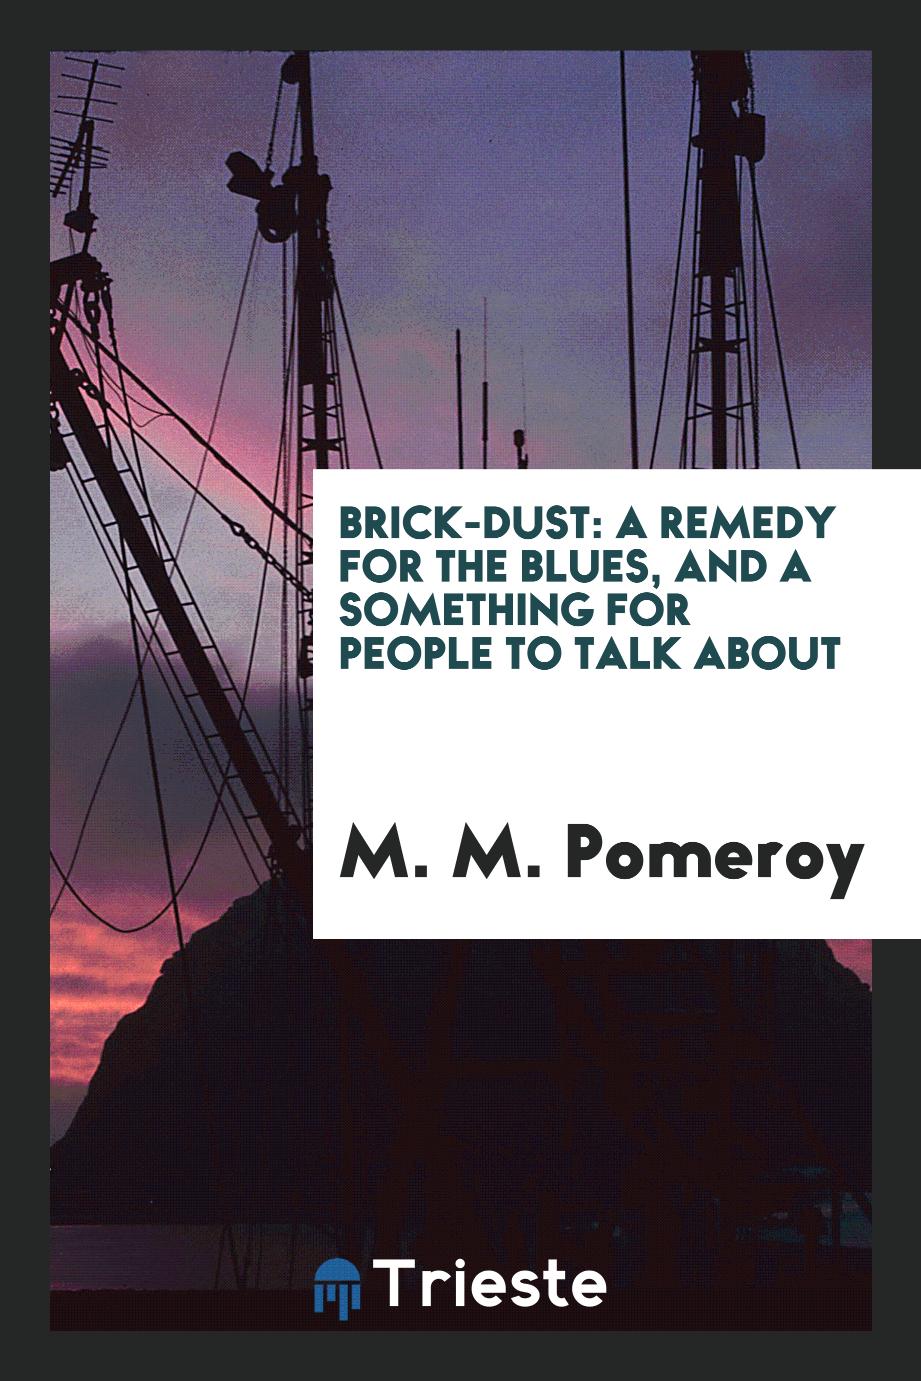 Brick-Dust: A Remedy for the Blues, and a Something for People to Talk About